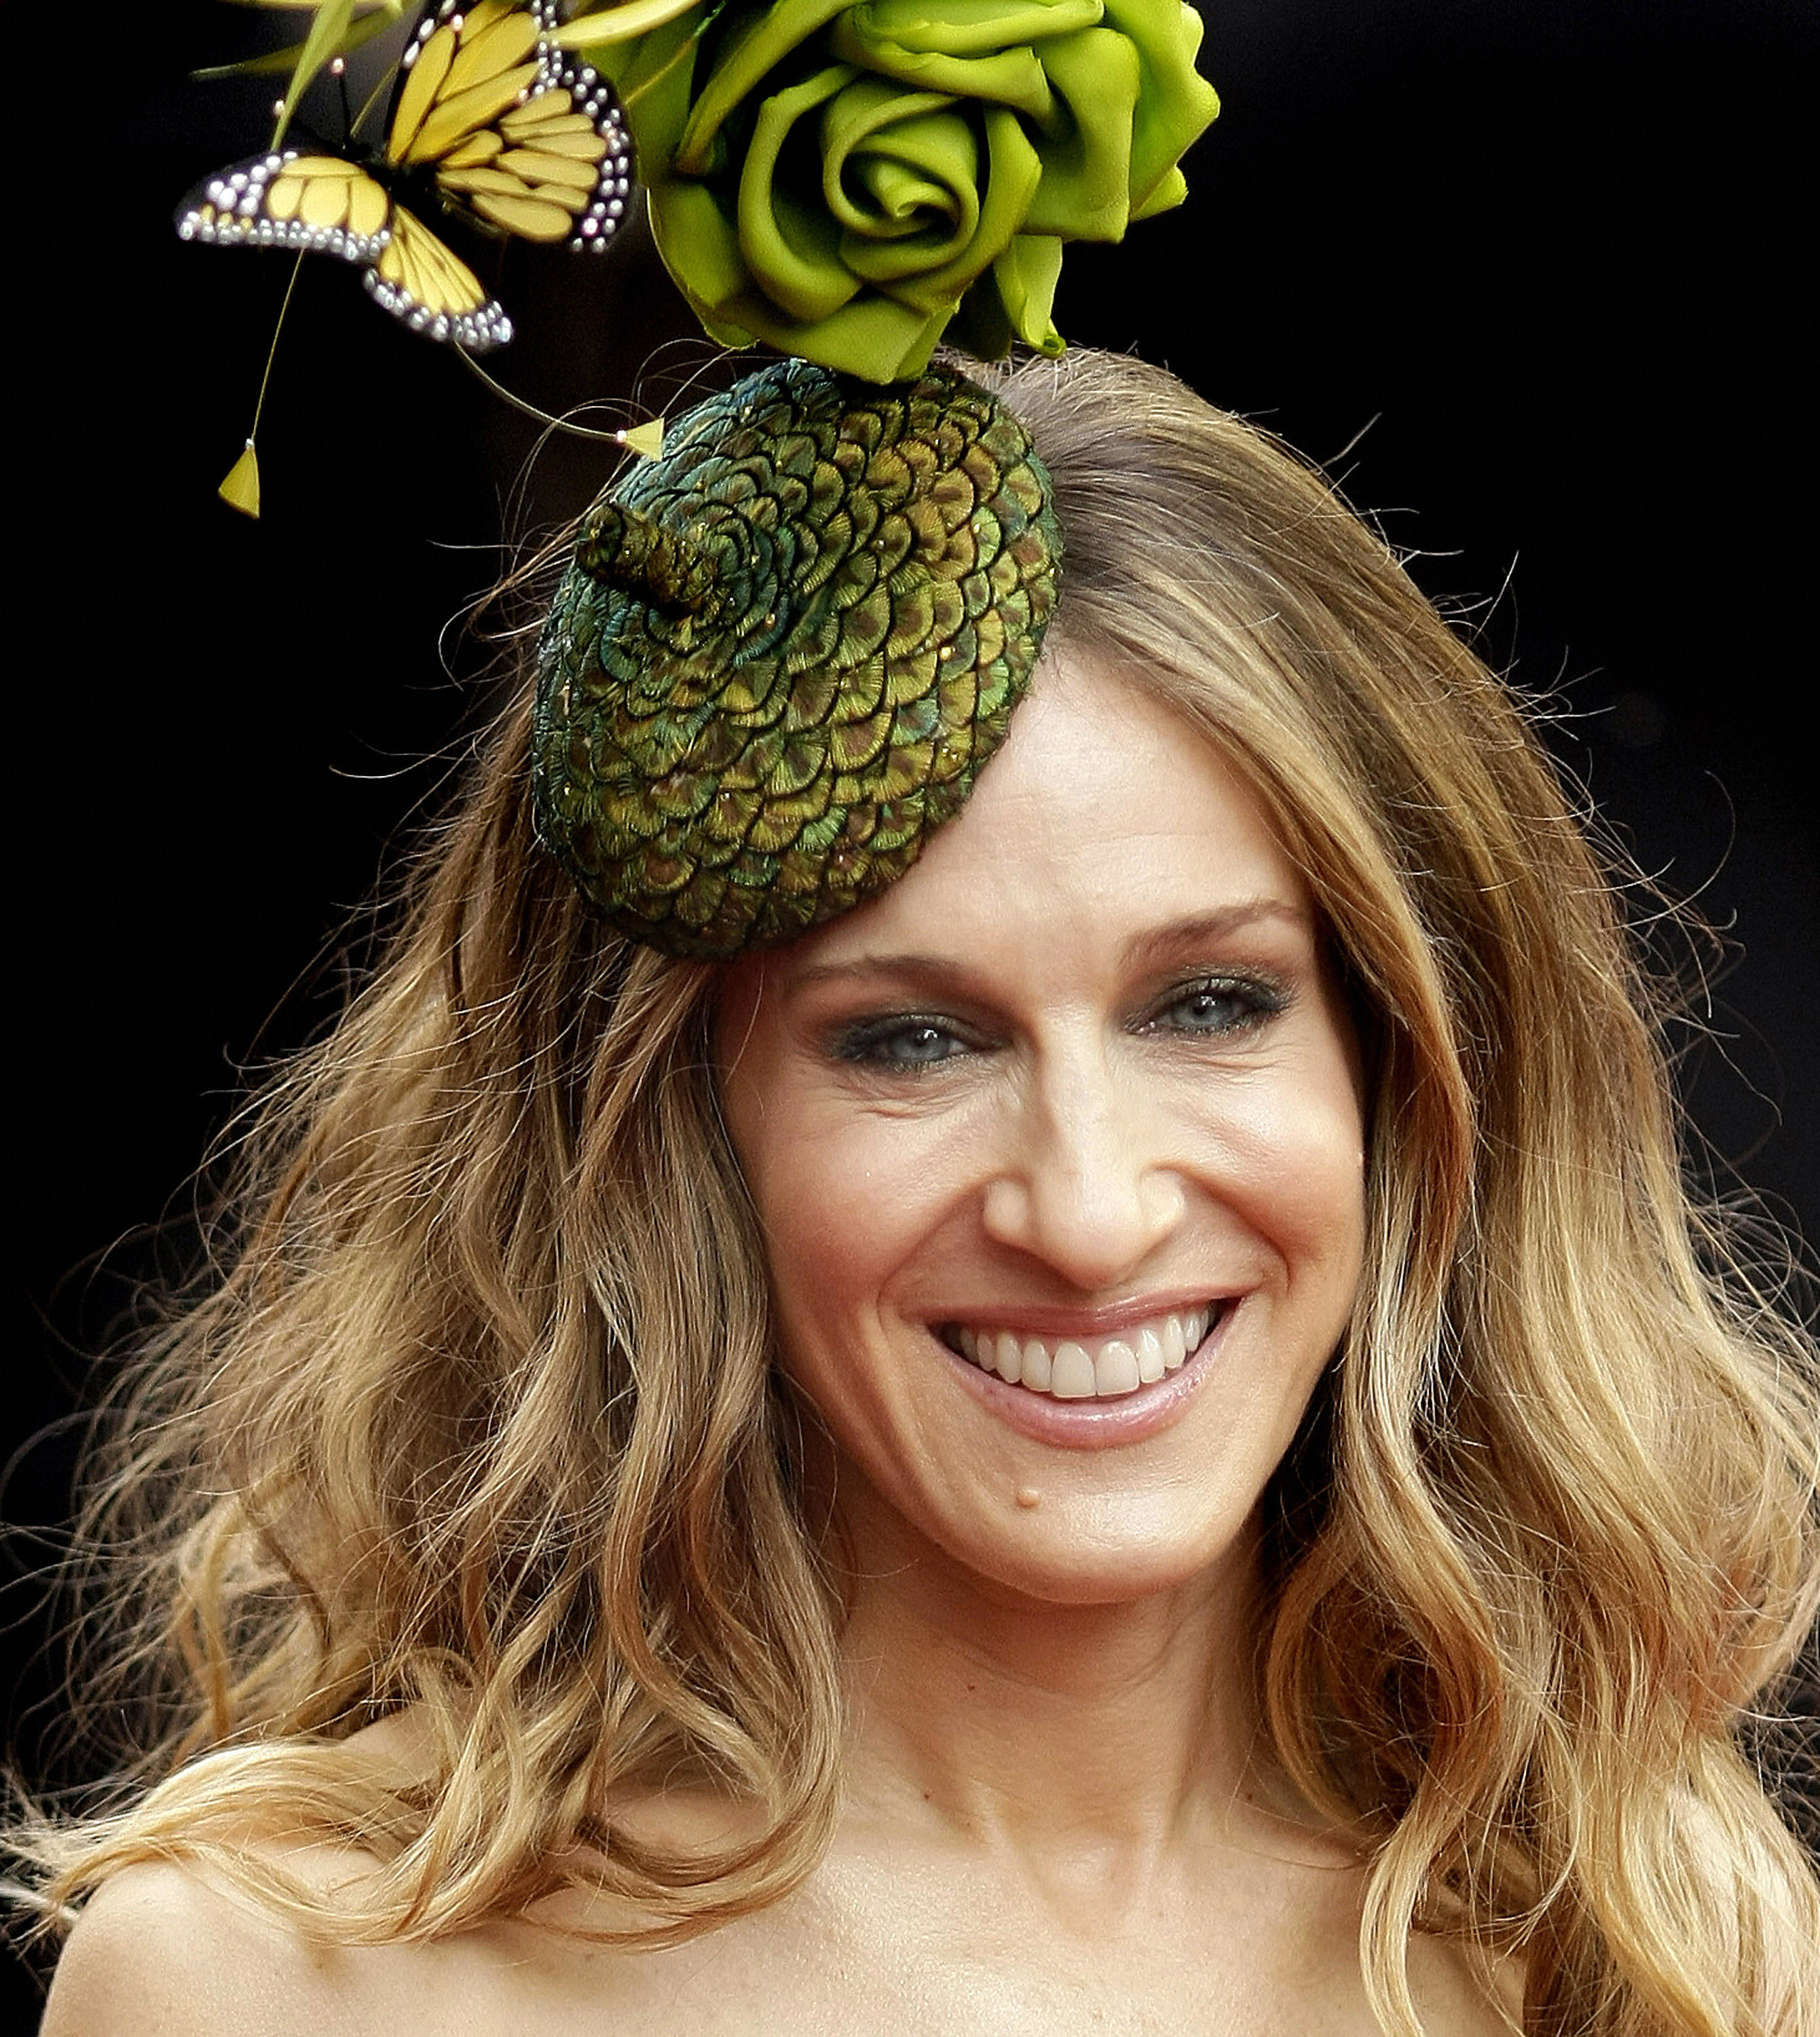 A close-up photo of Sarah Jessica Parker wearing an extravagant green hat, a mole on her chin is very visible